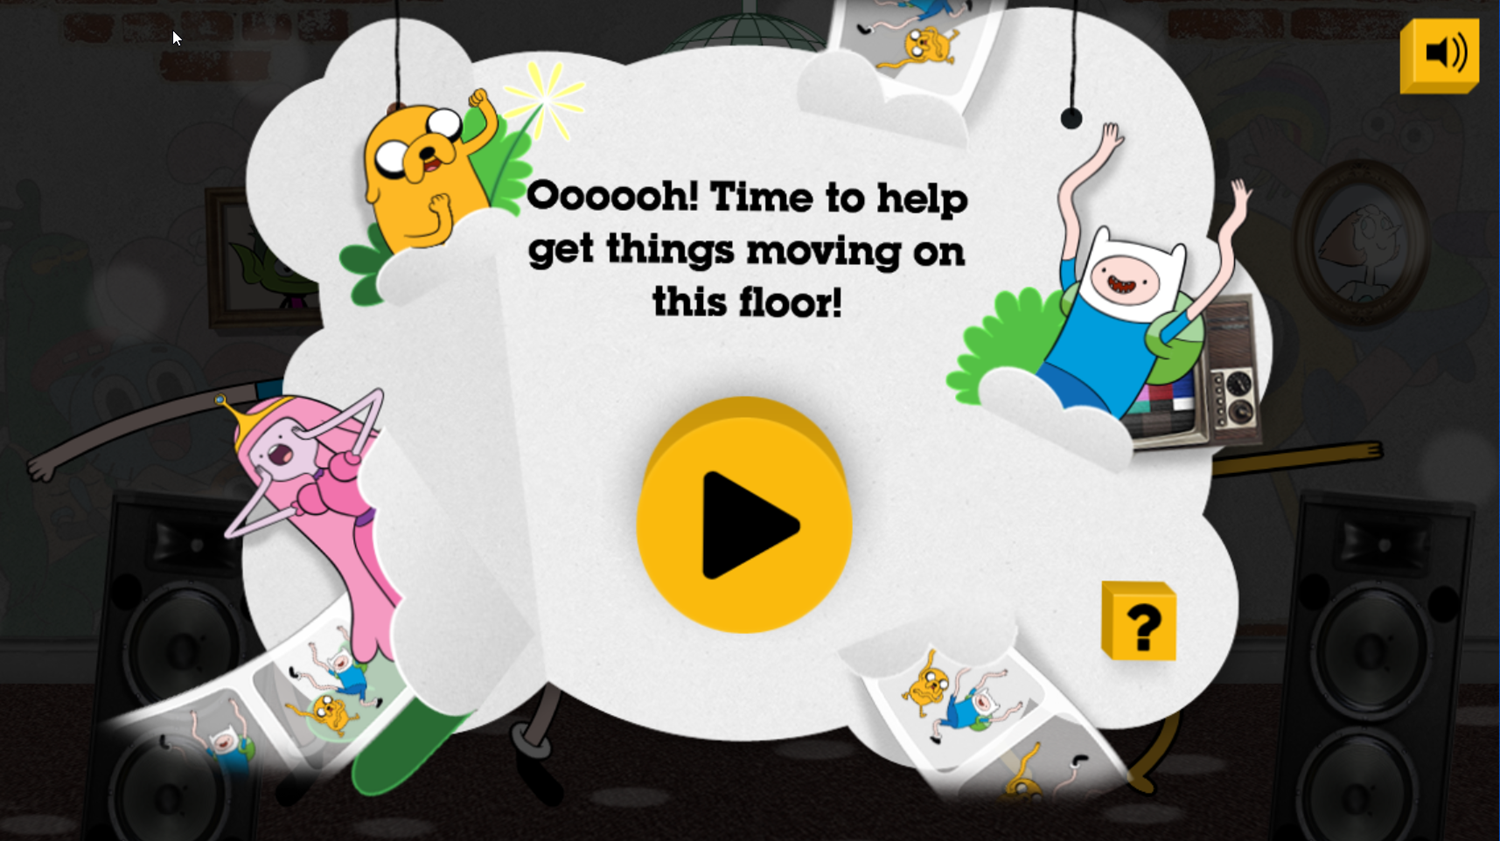 Adventure Time Animation Game Welcome Screen Screenshot.